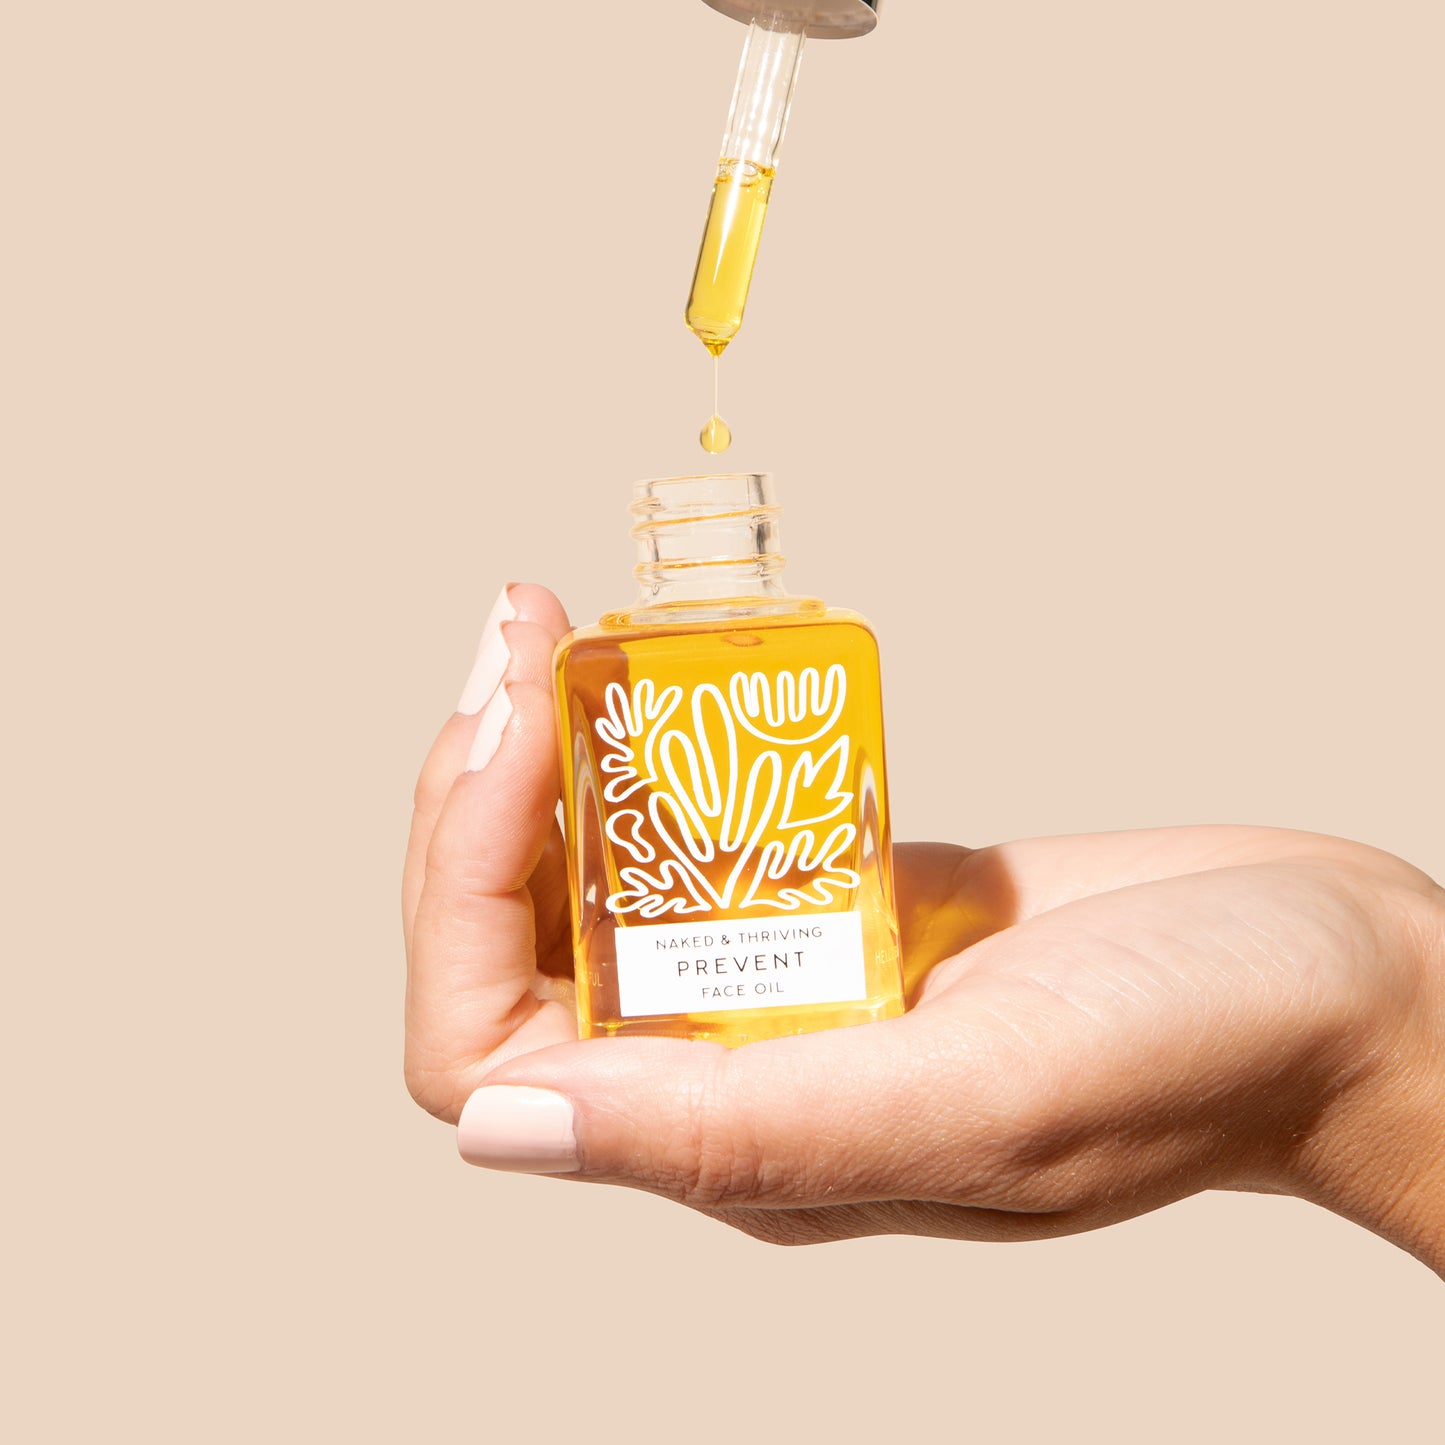 Rice Bran Oil for Skin, the Deeply Hydrating, Anti-Aging Ingredient